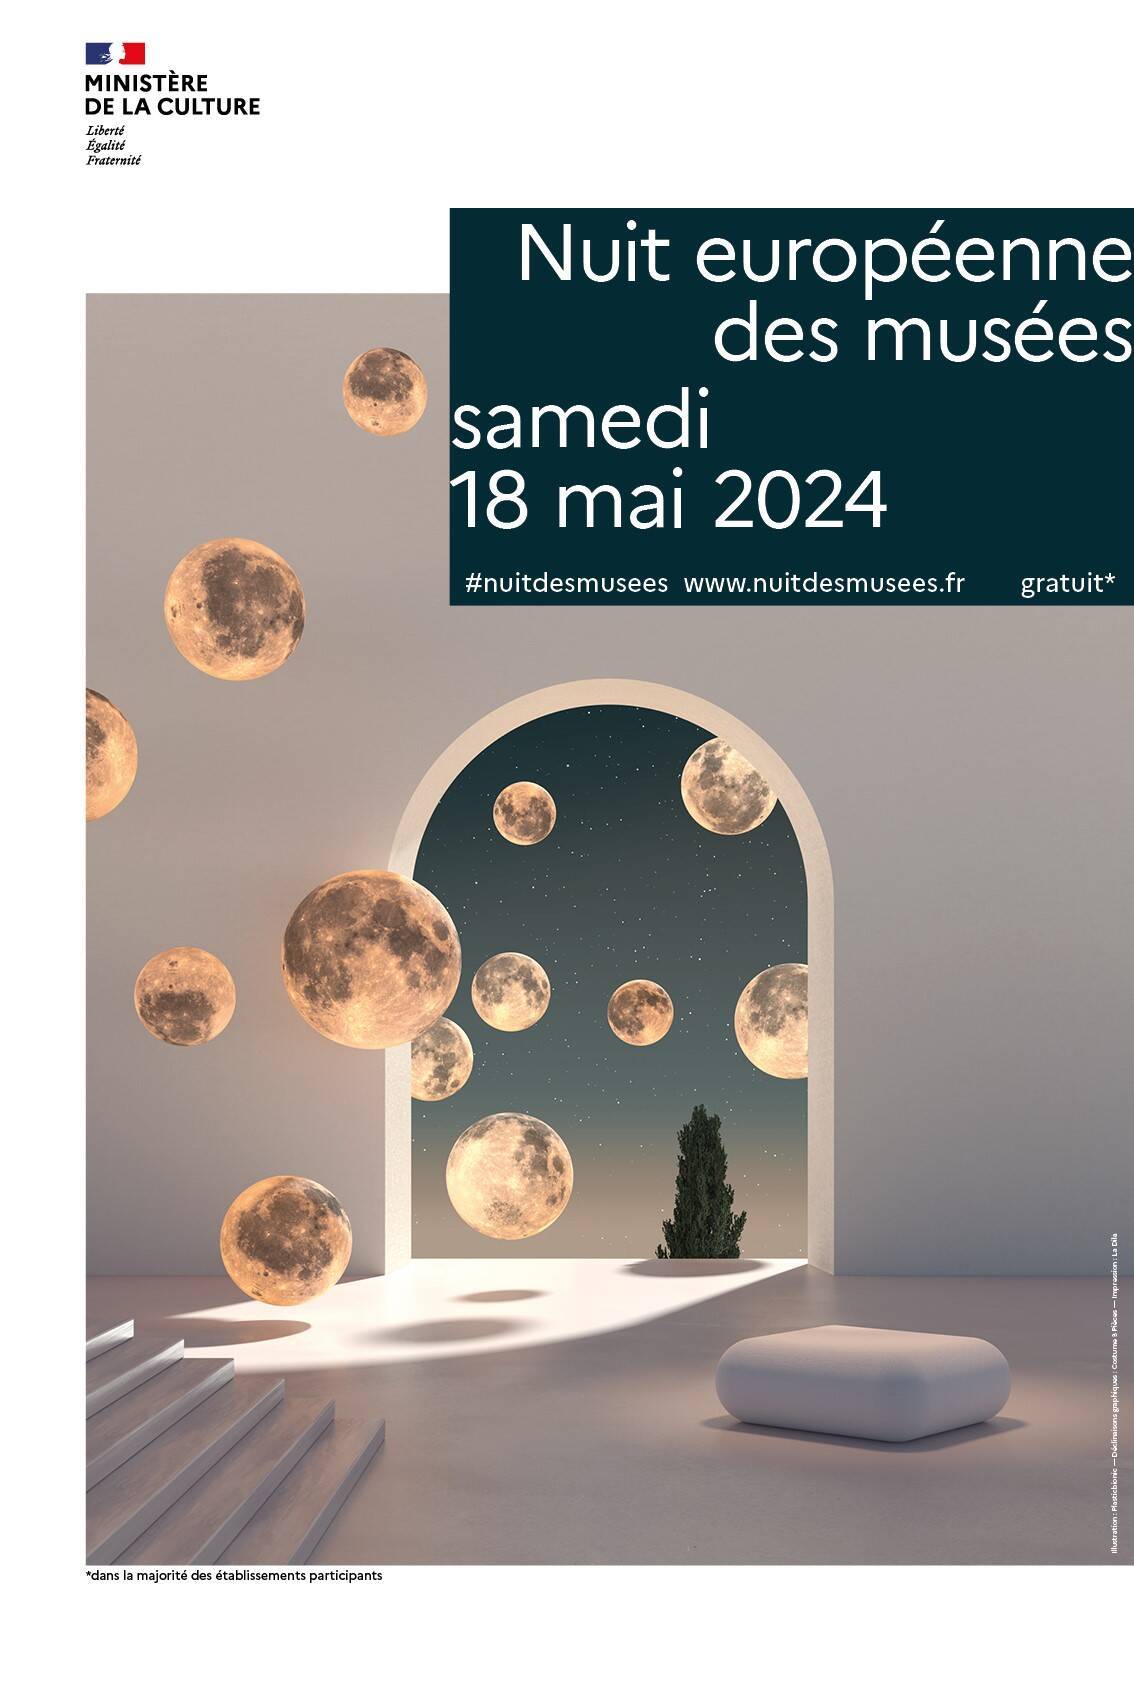 ©Nuit europeenne des musees